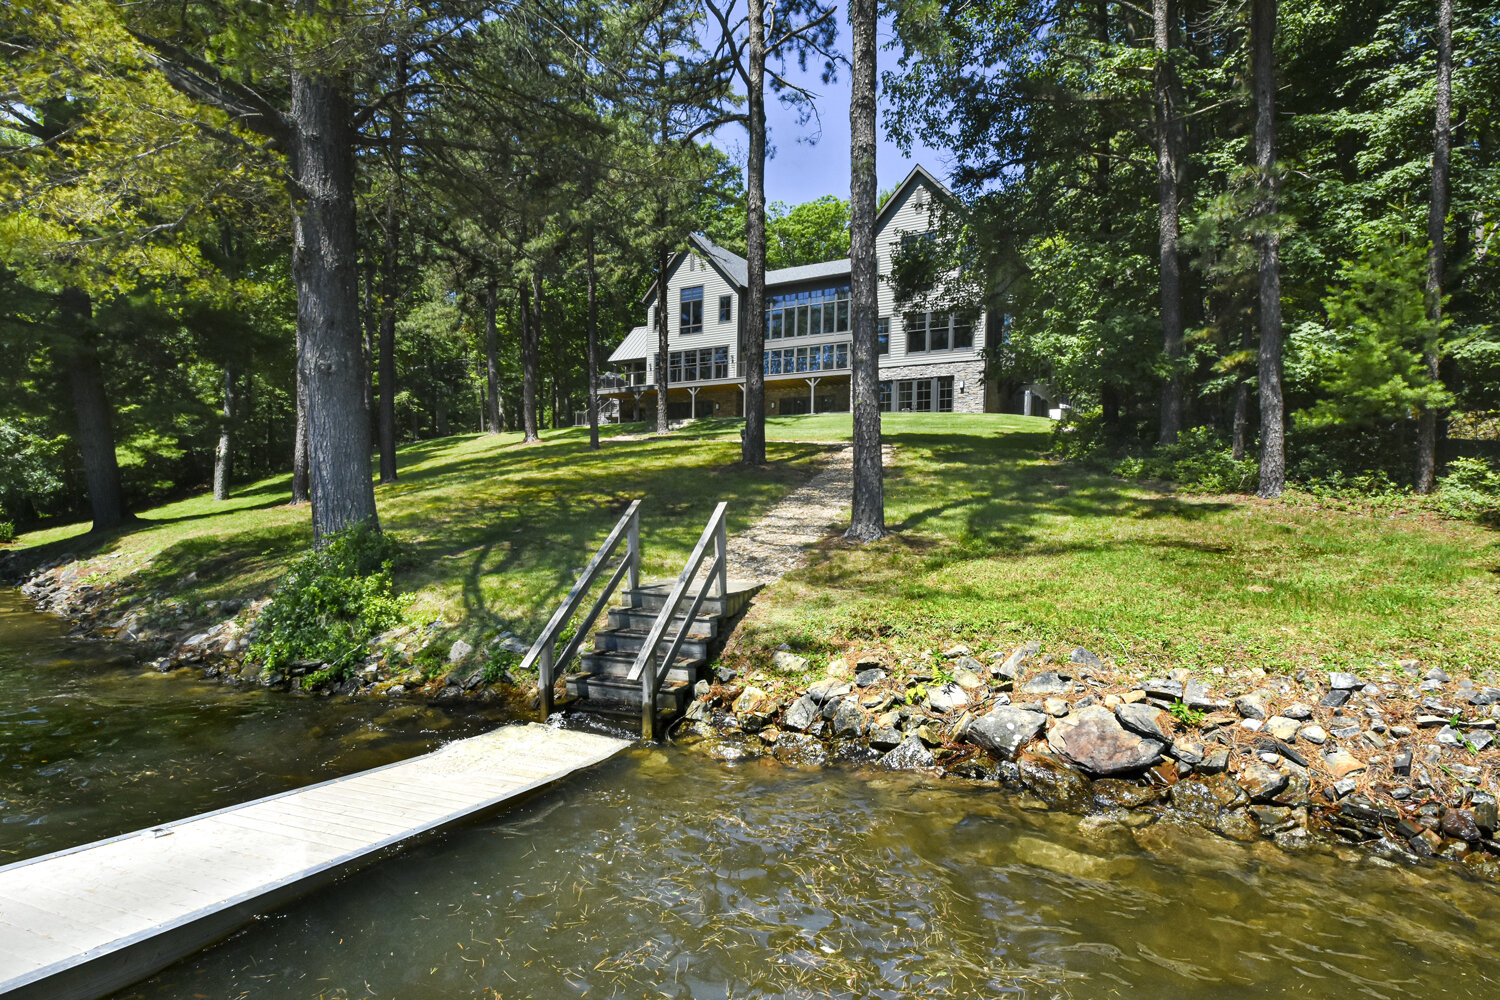 exterior-view-of-house-from-lake-(4)_web.jpg